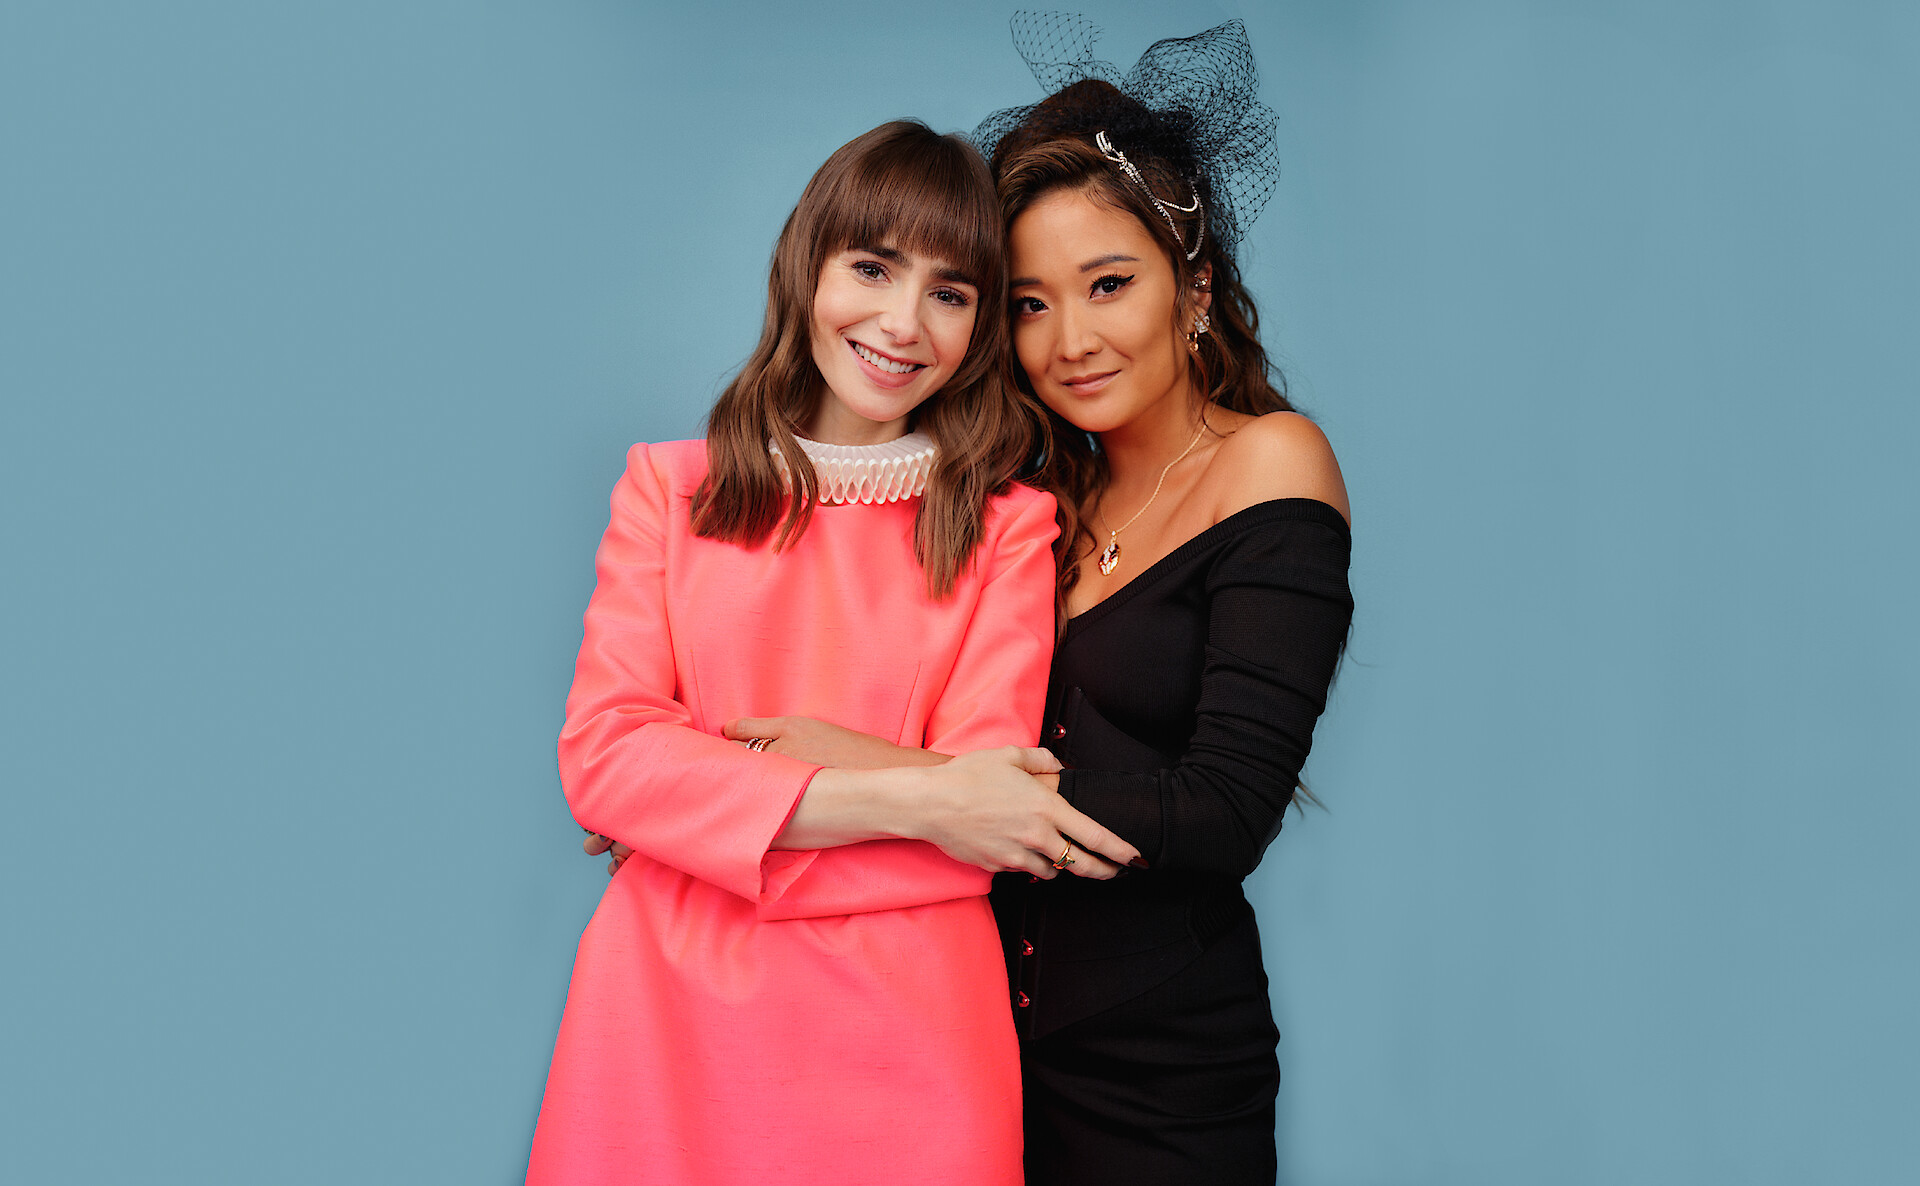 Emily in Paris Stars Lily Collins and Ashley Park Are Real Friends